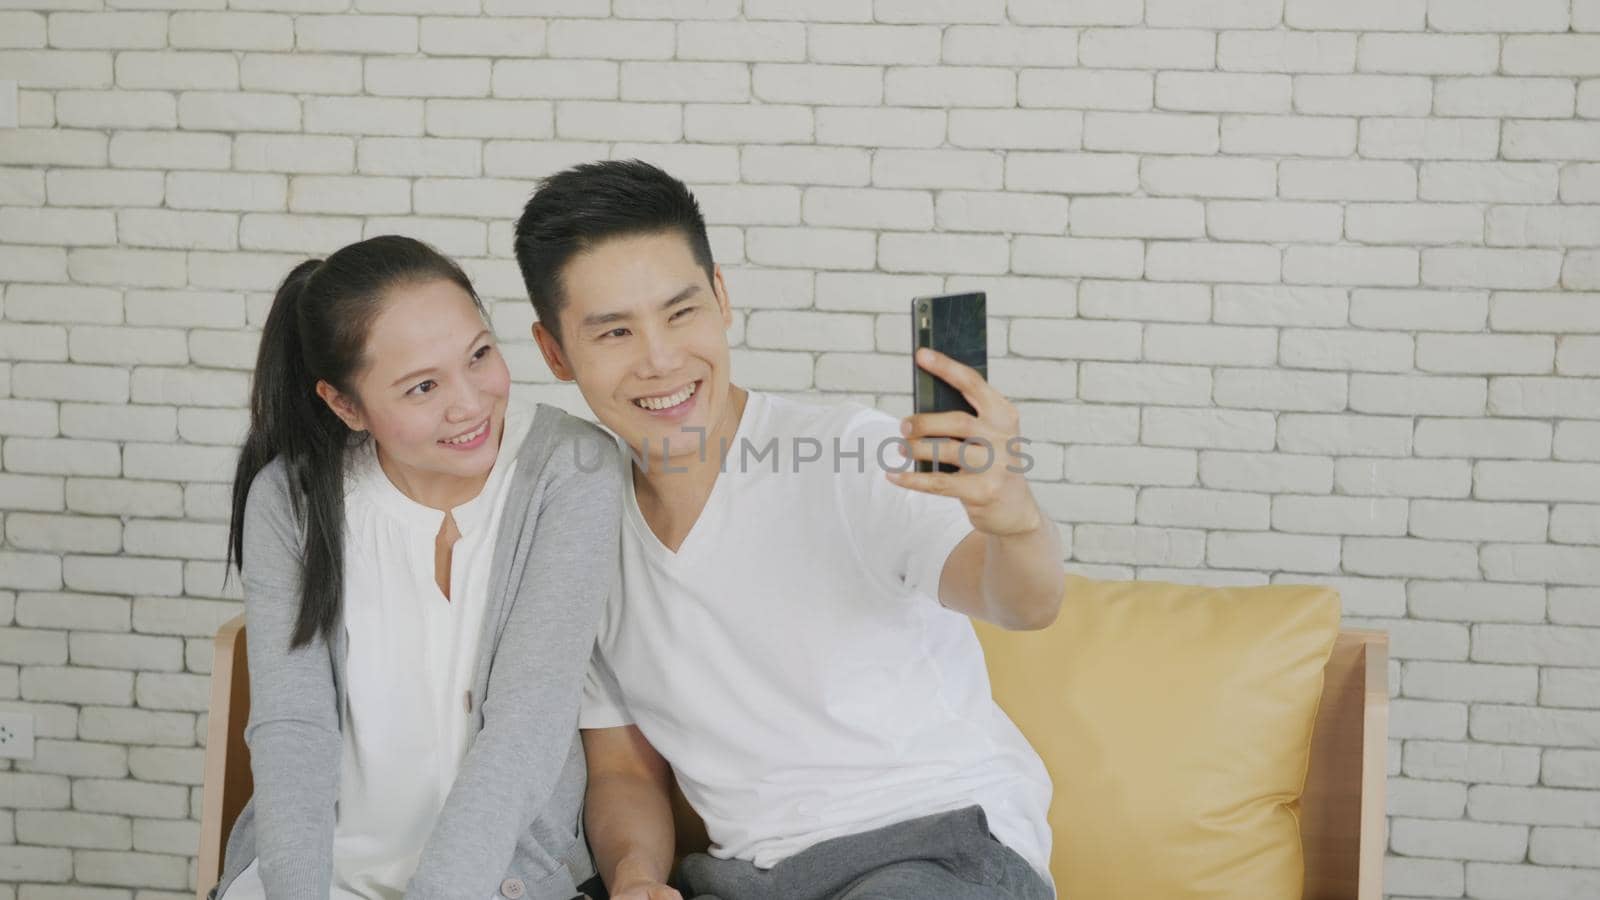 Happy Asian beautiful family couple husband and wife laughing sitting on sofa in the living room taking selfie picture with a smartphone. boyfriend and girlfriend relaxing at home